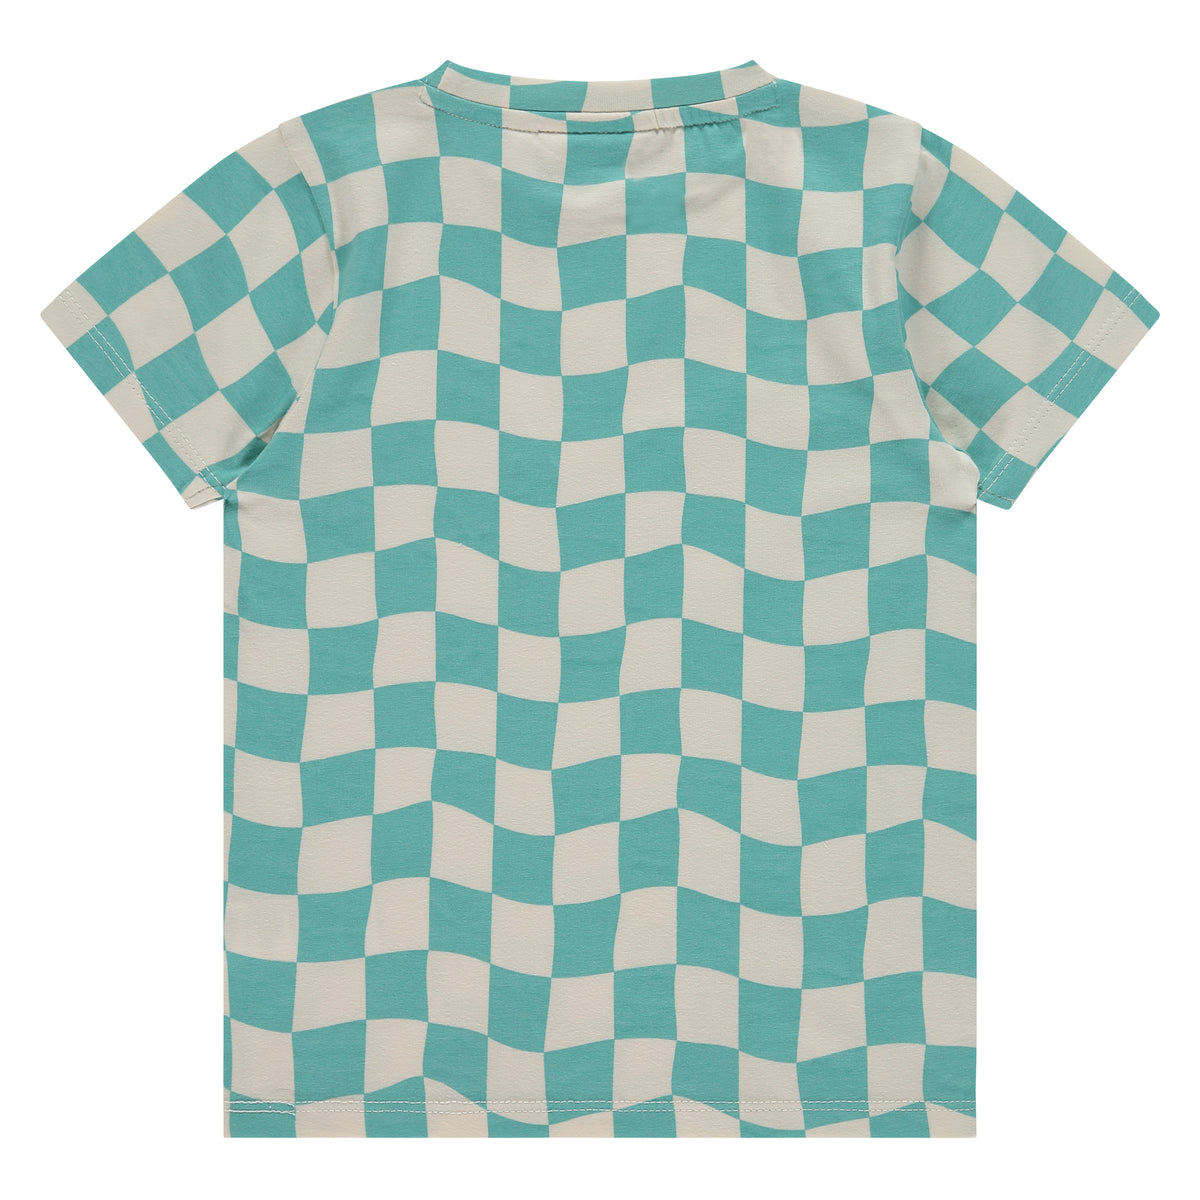 Boys T-shirt turquoise, Stains & Stories